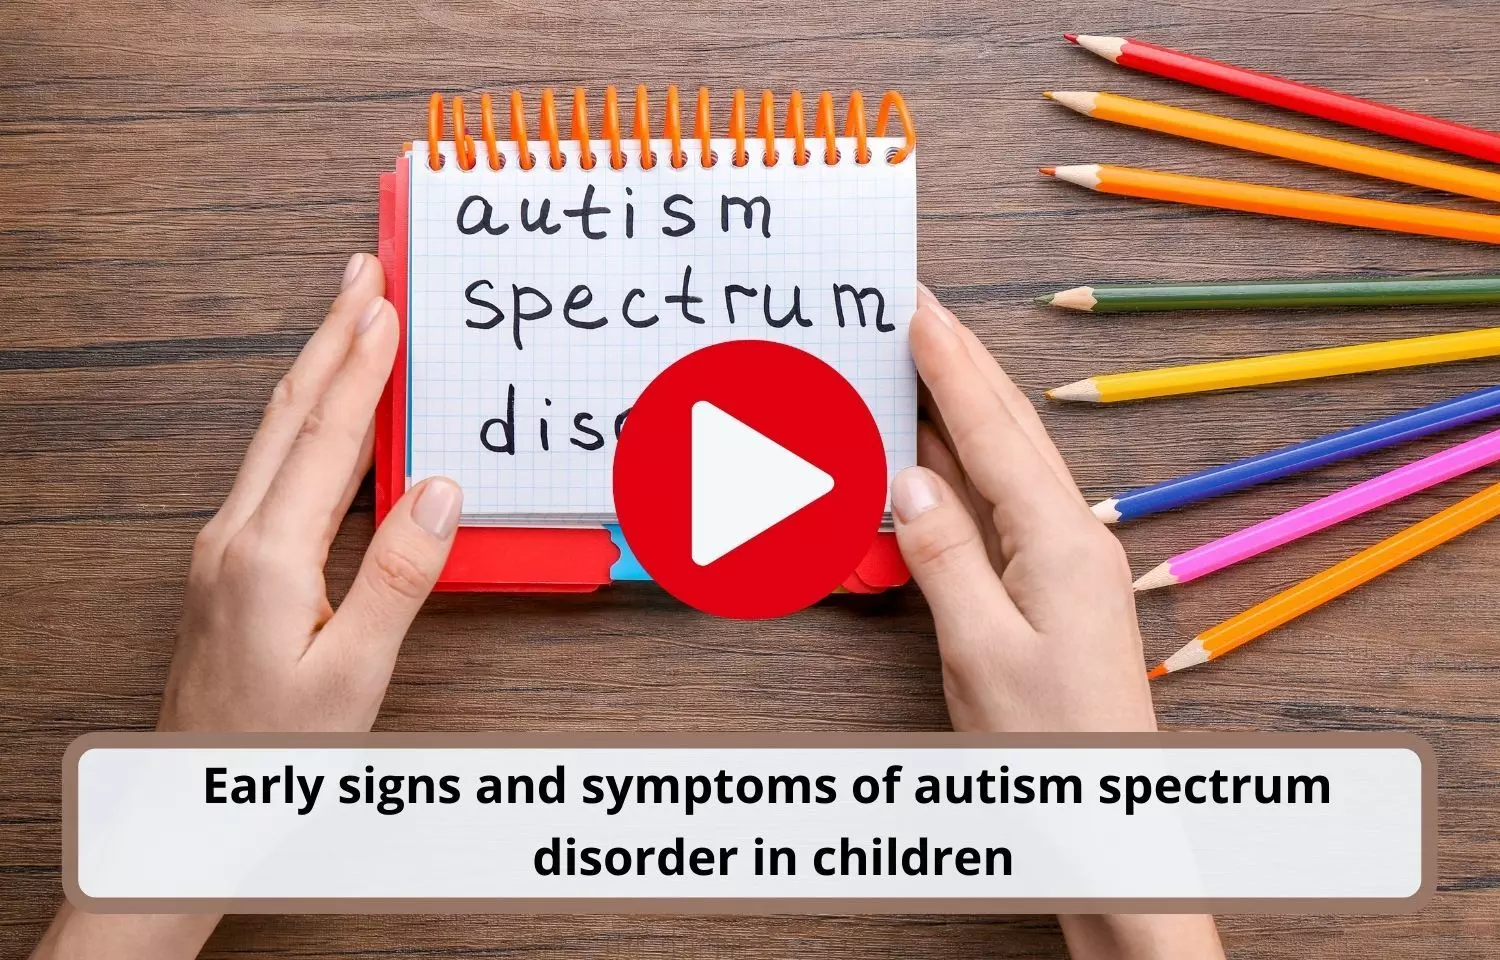 Autism spectrum disorder in children, signs and symptoms